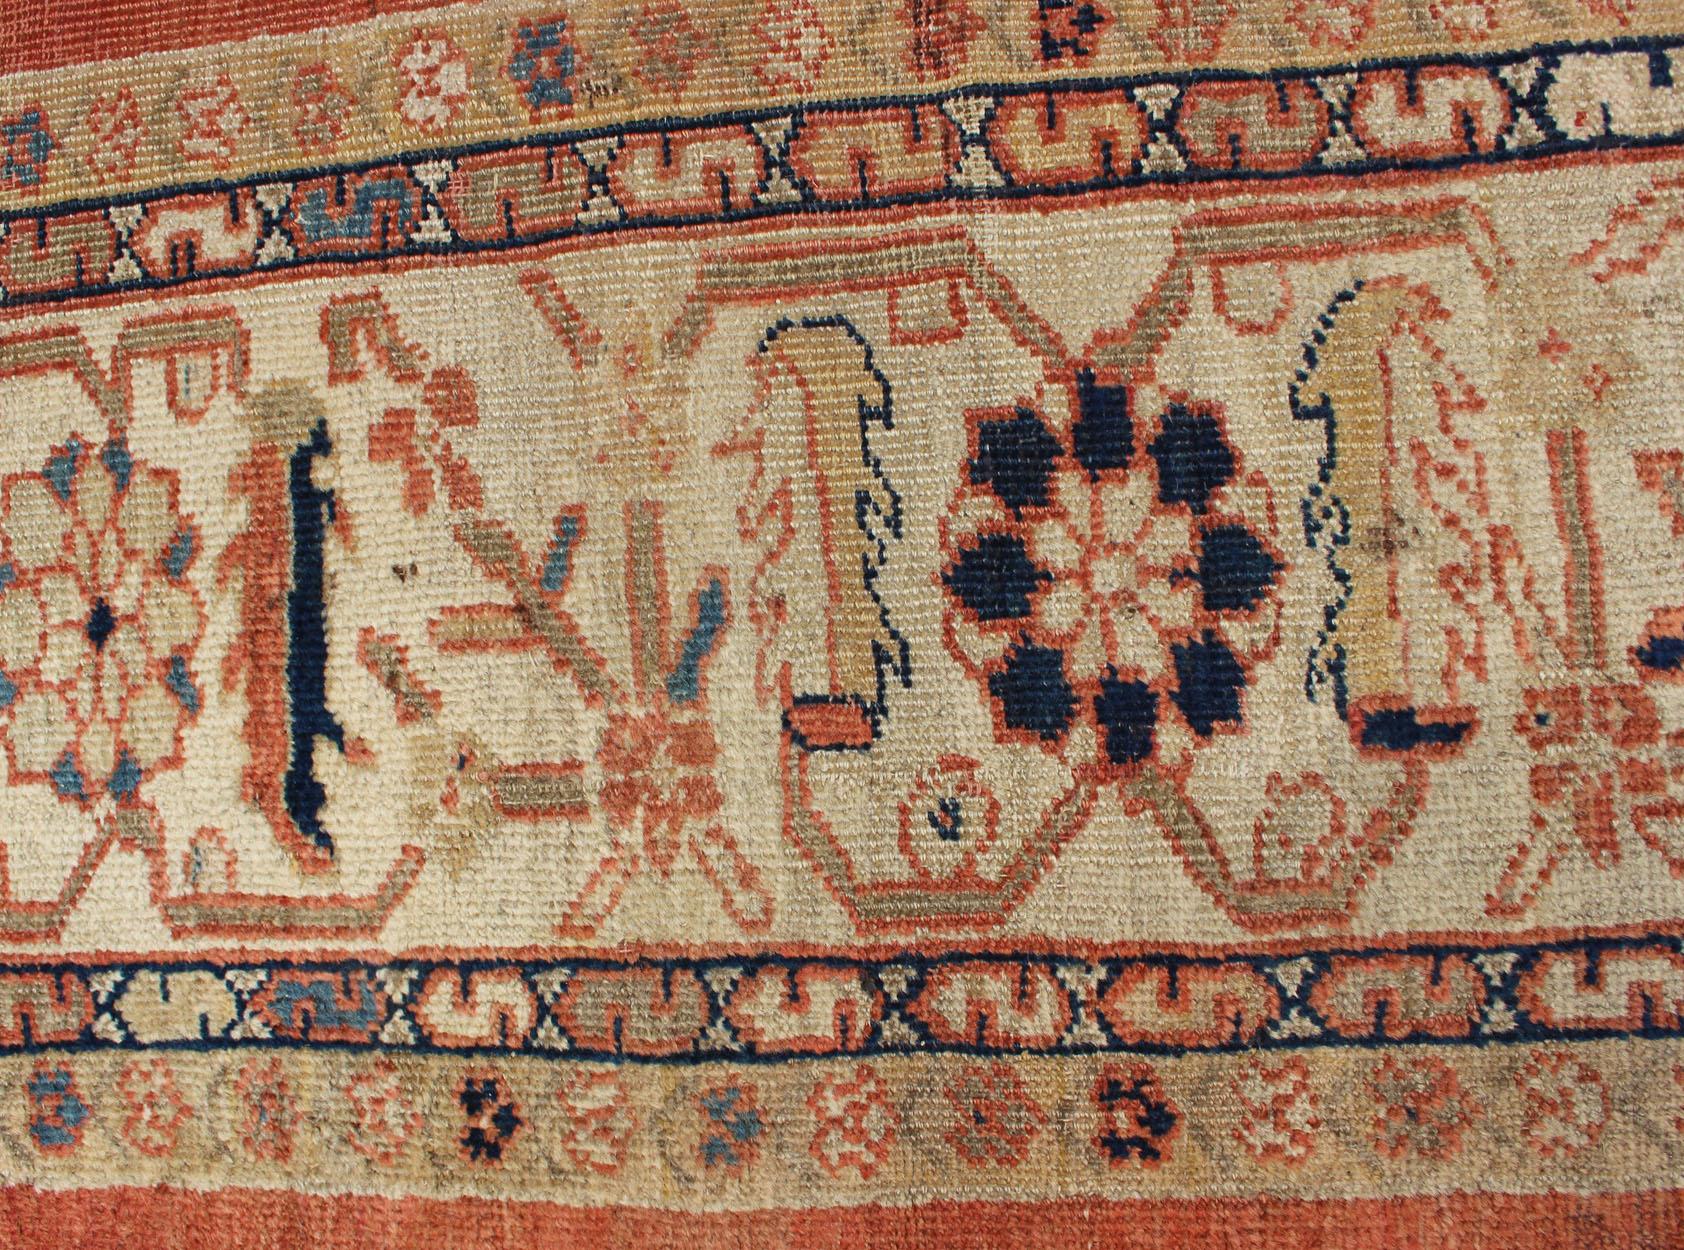 Antique Large Ziegler Sultanabad Rug in Soft Orange, Cream and Navy Blue For Sale 5